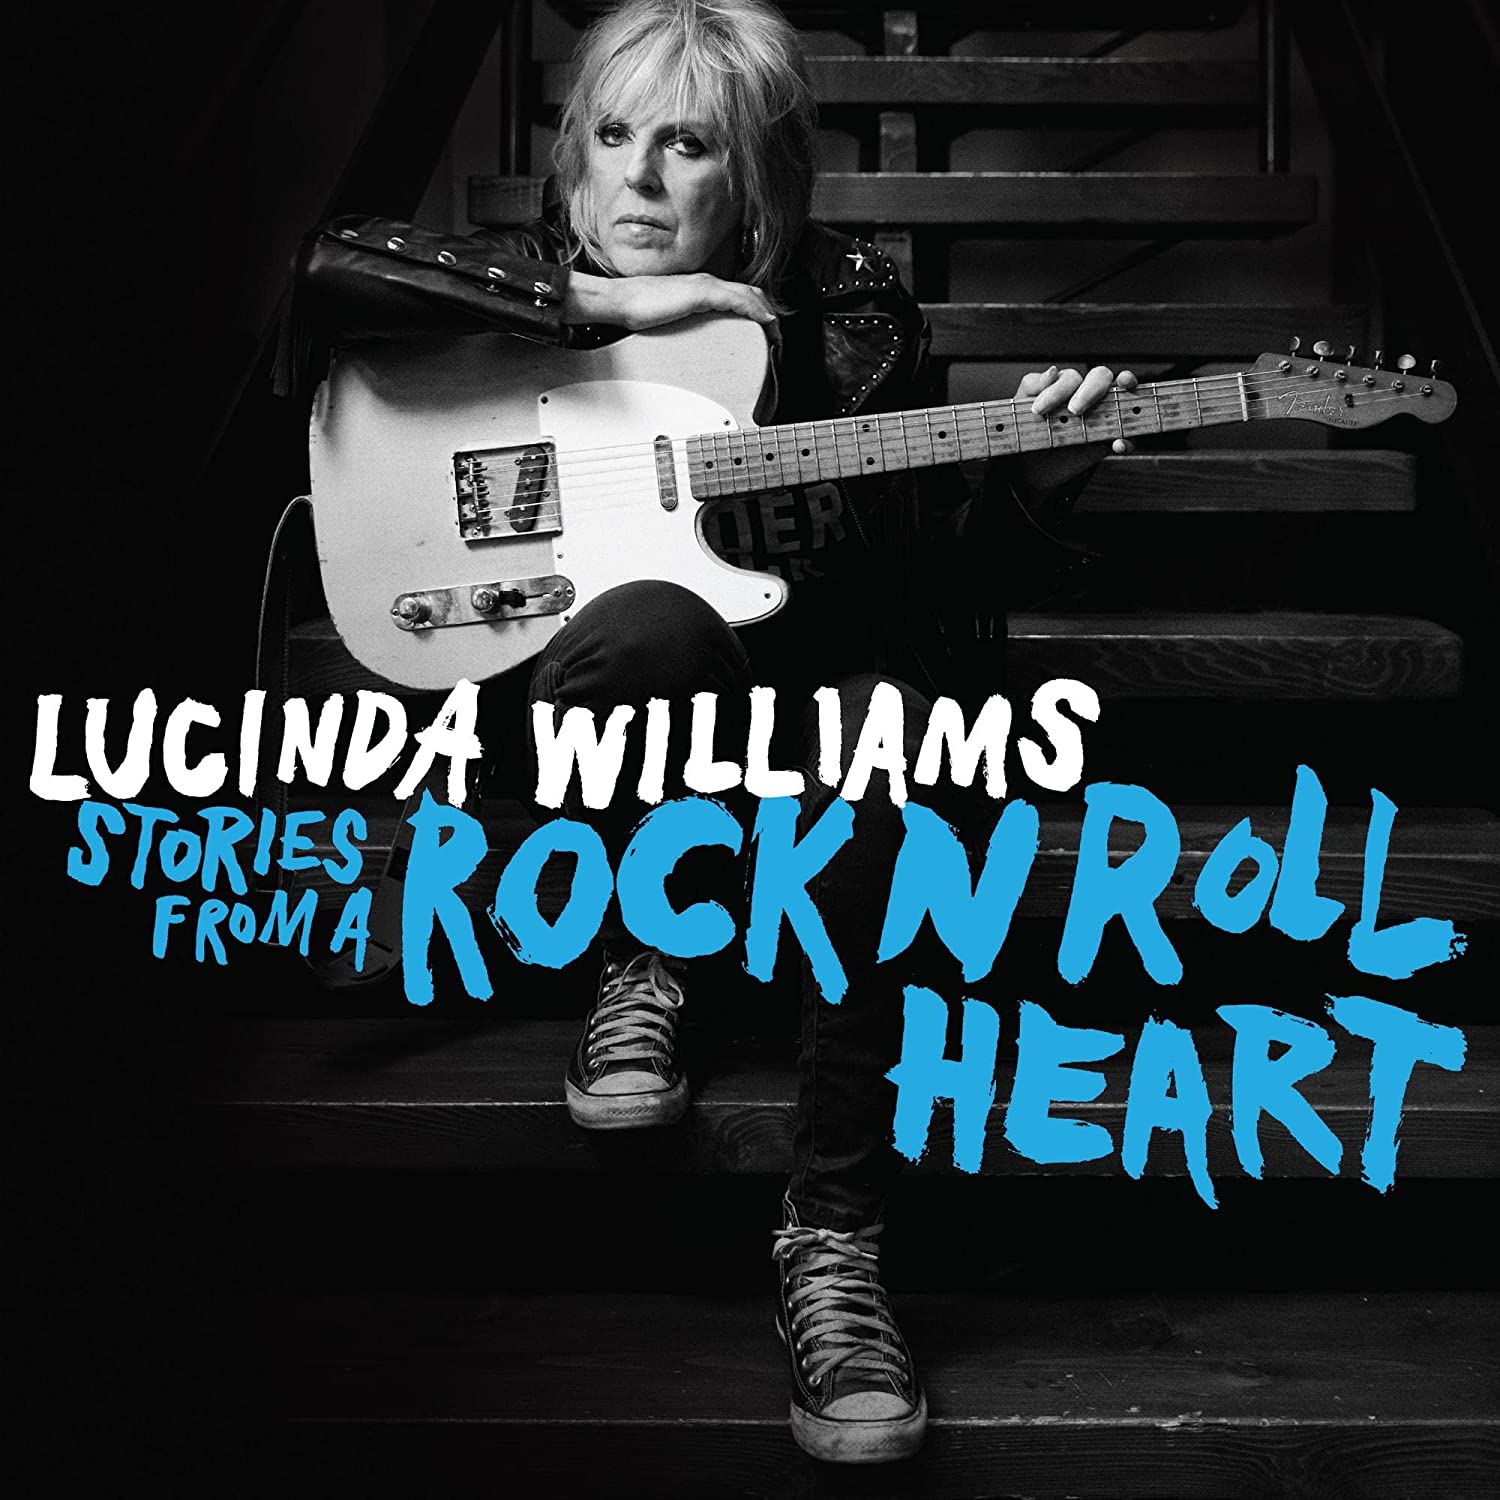 Lucinda Williams - Stories from a rock 'n roll heart